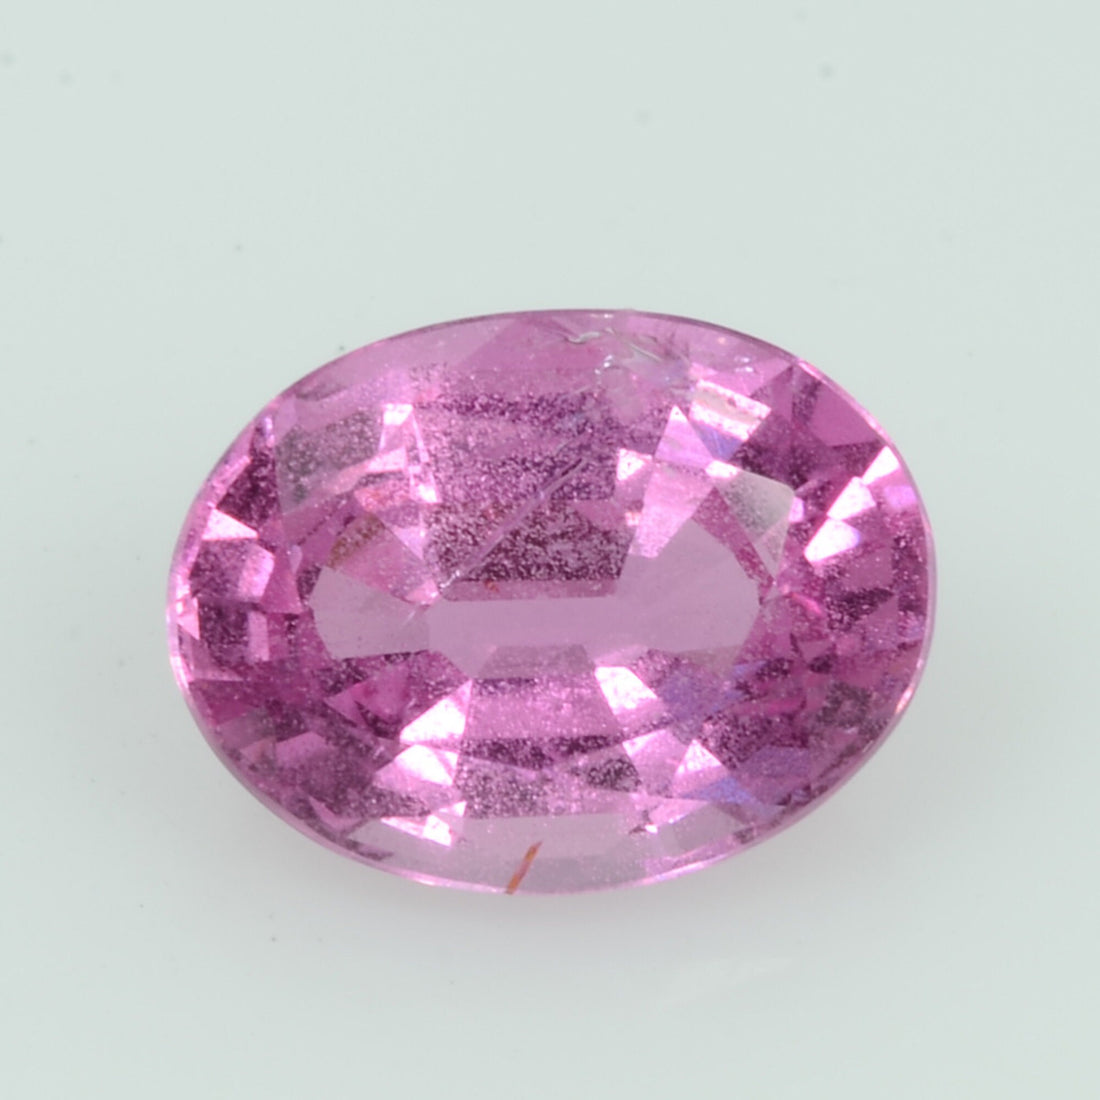 1.64 cts Natural Pink Sapphire Loose Gemstone Oval Cut